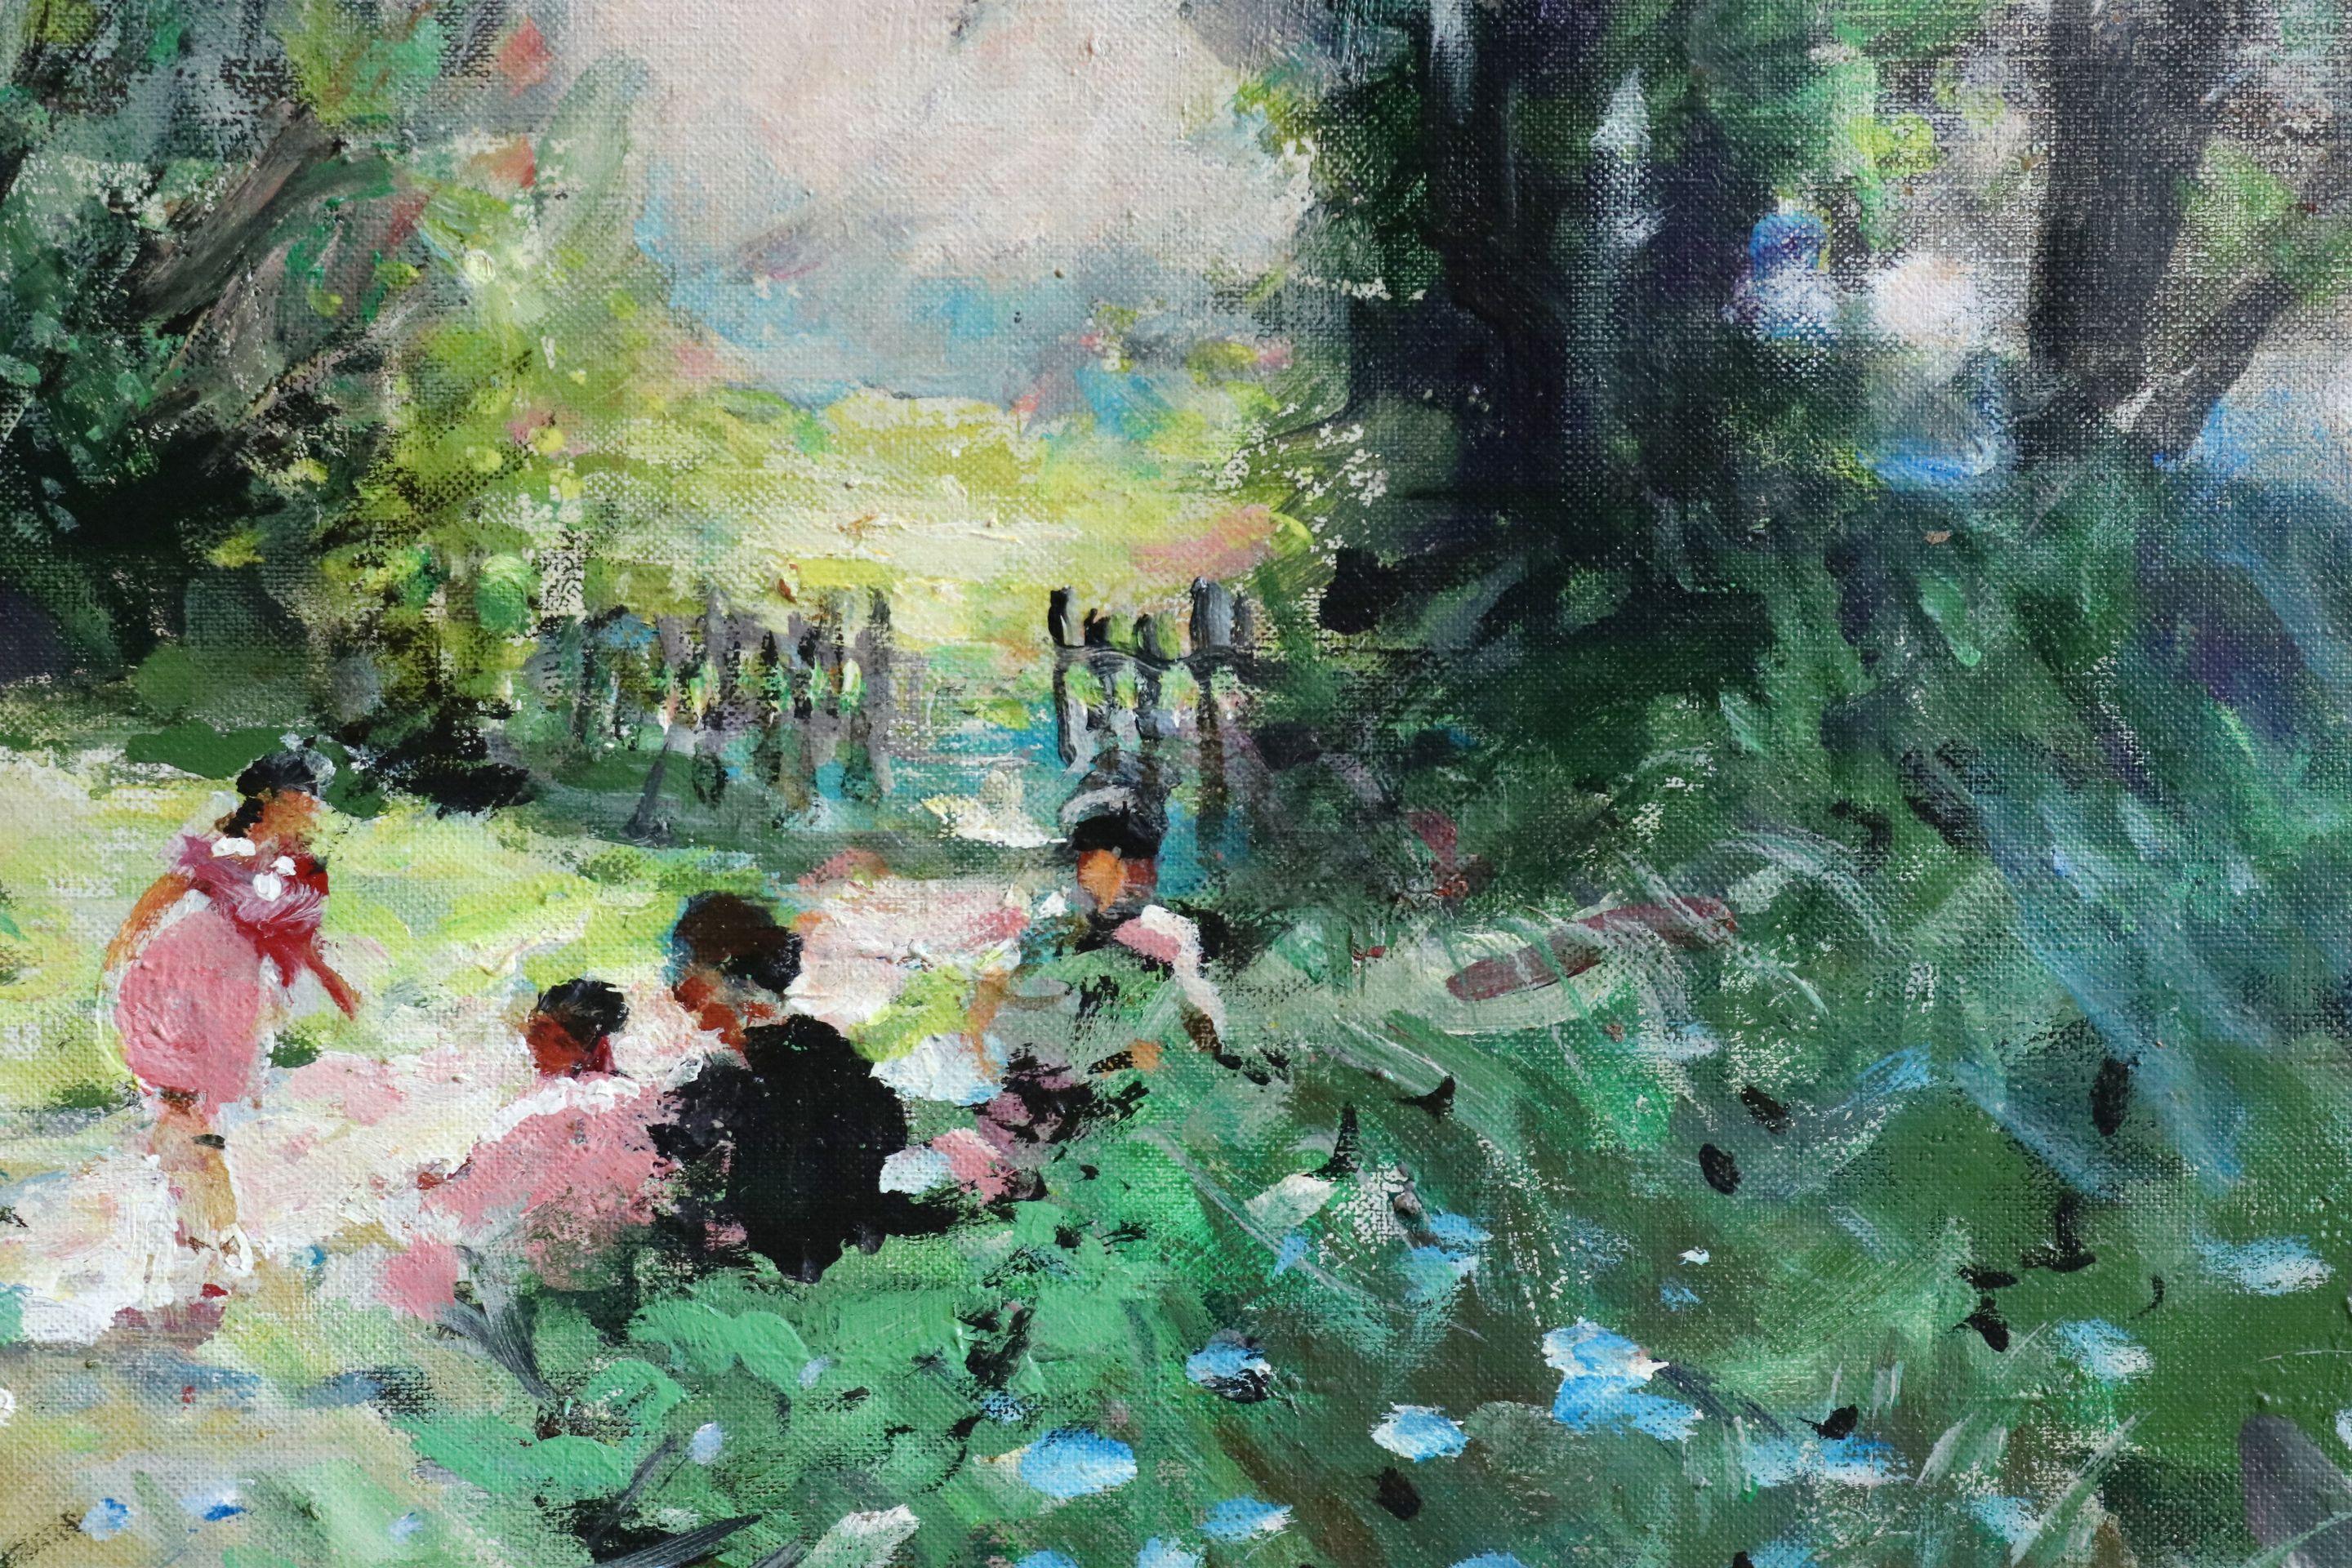 Oil on canvas circa 1950 by Jules René Hervé depicting children playing in a summer landscape. Signed lower left and verso. Framed dimensions are 24 inches high by 20 inches wide.

Jules René Hervé (French, 1887-1981) was an Academic painter, born